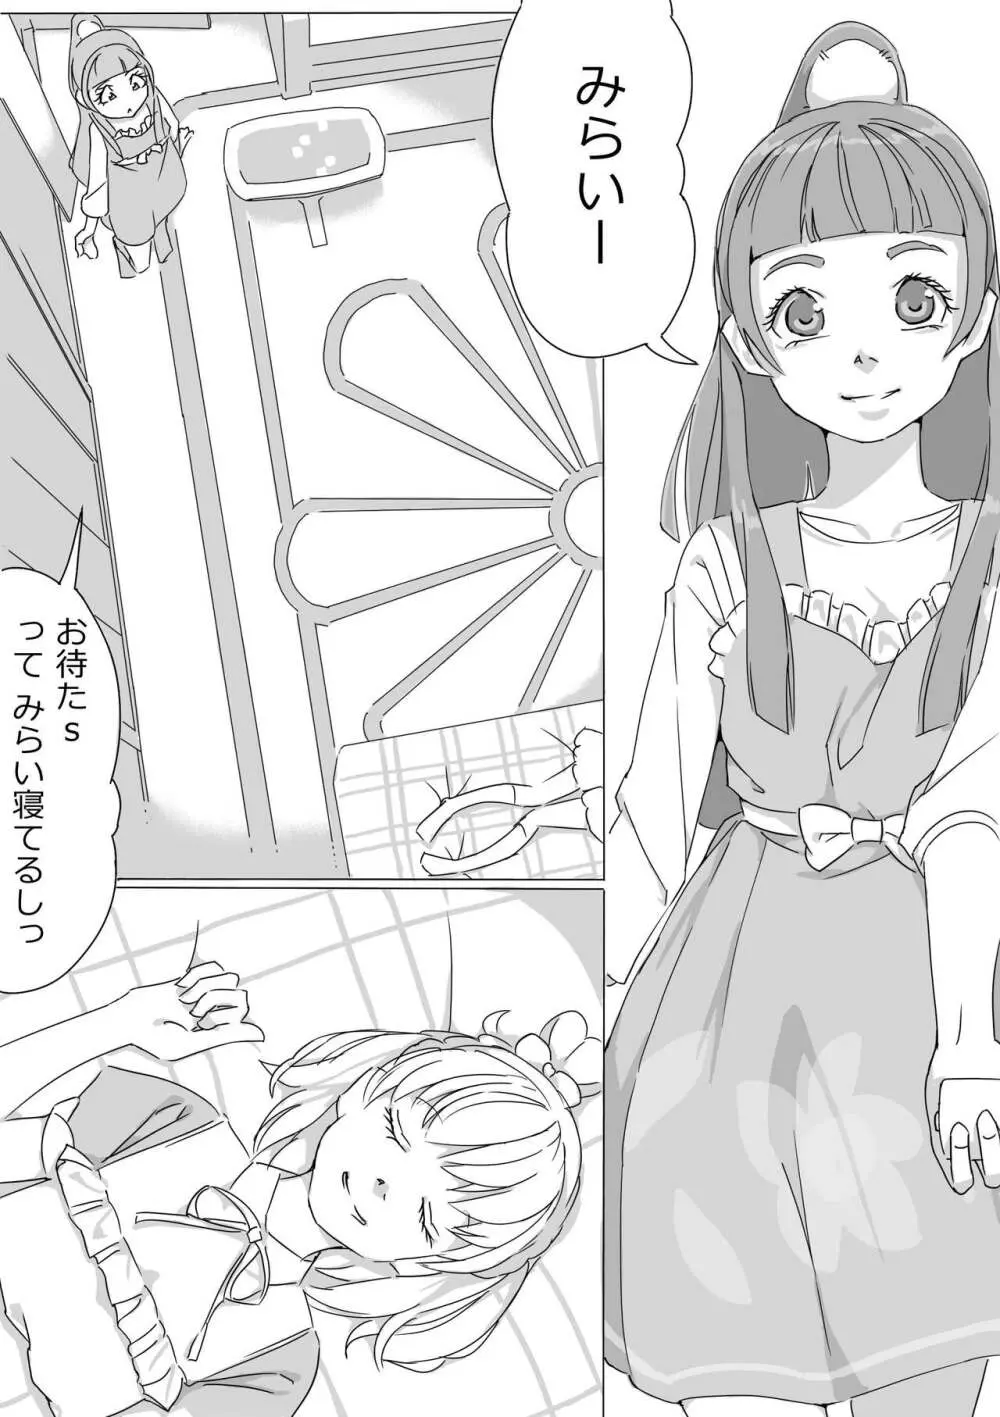 Untitled Precure Doujinshi - page1